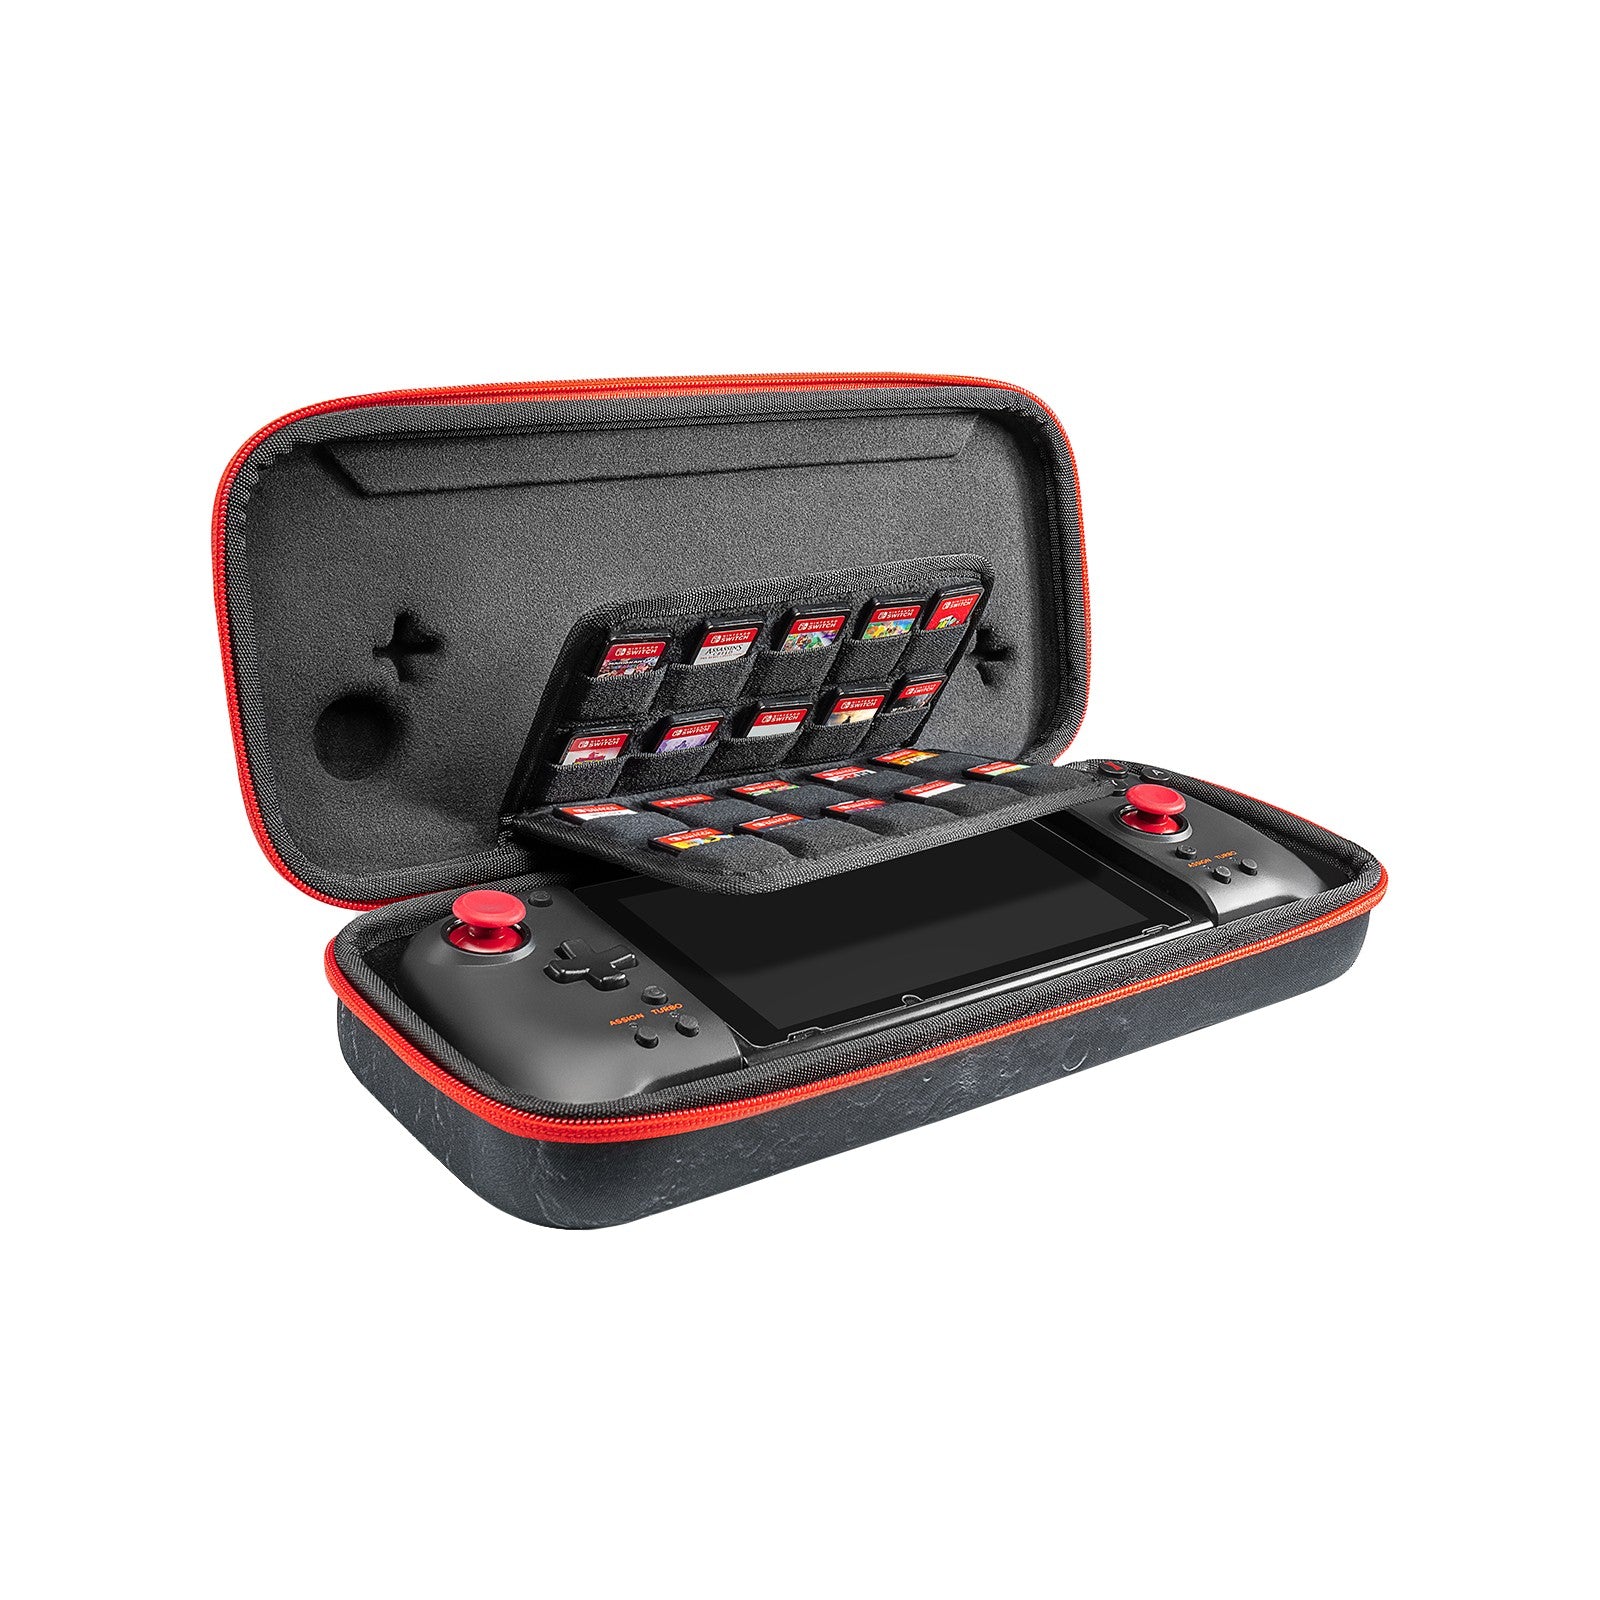 Carry Case for Nintendo Switch / Oled Hori Split Pad Pro Controller | Moon